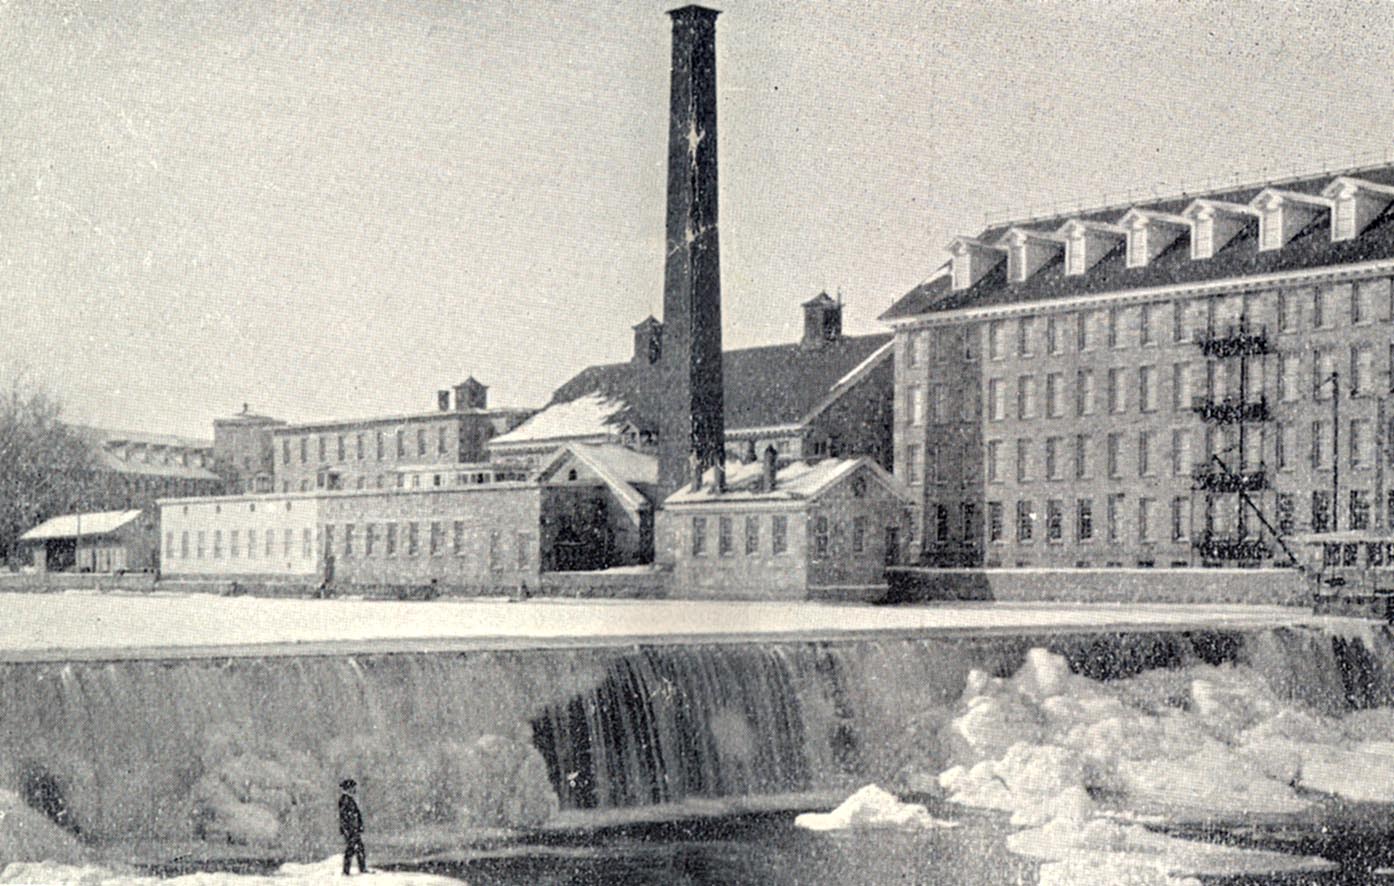 Mill dam on the Willimantic River, 1894